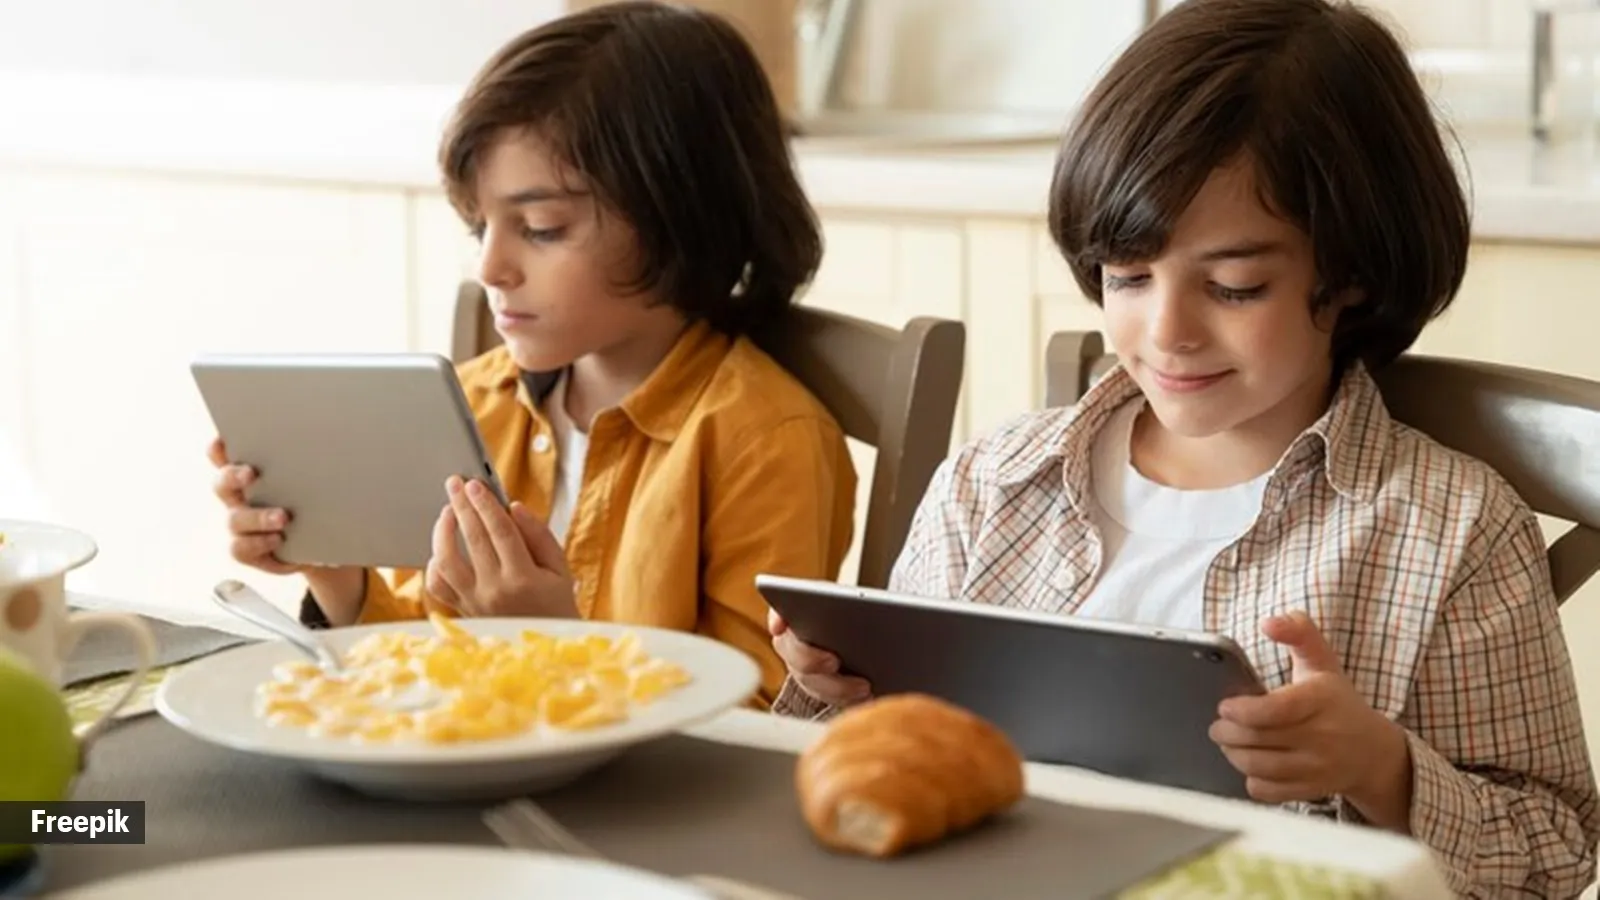 How is Junk Food Marketing Influencing Children's Eating Habits and Calorie Consumption?